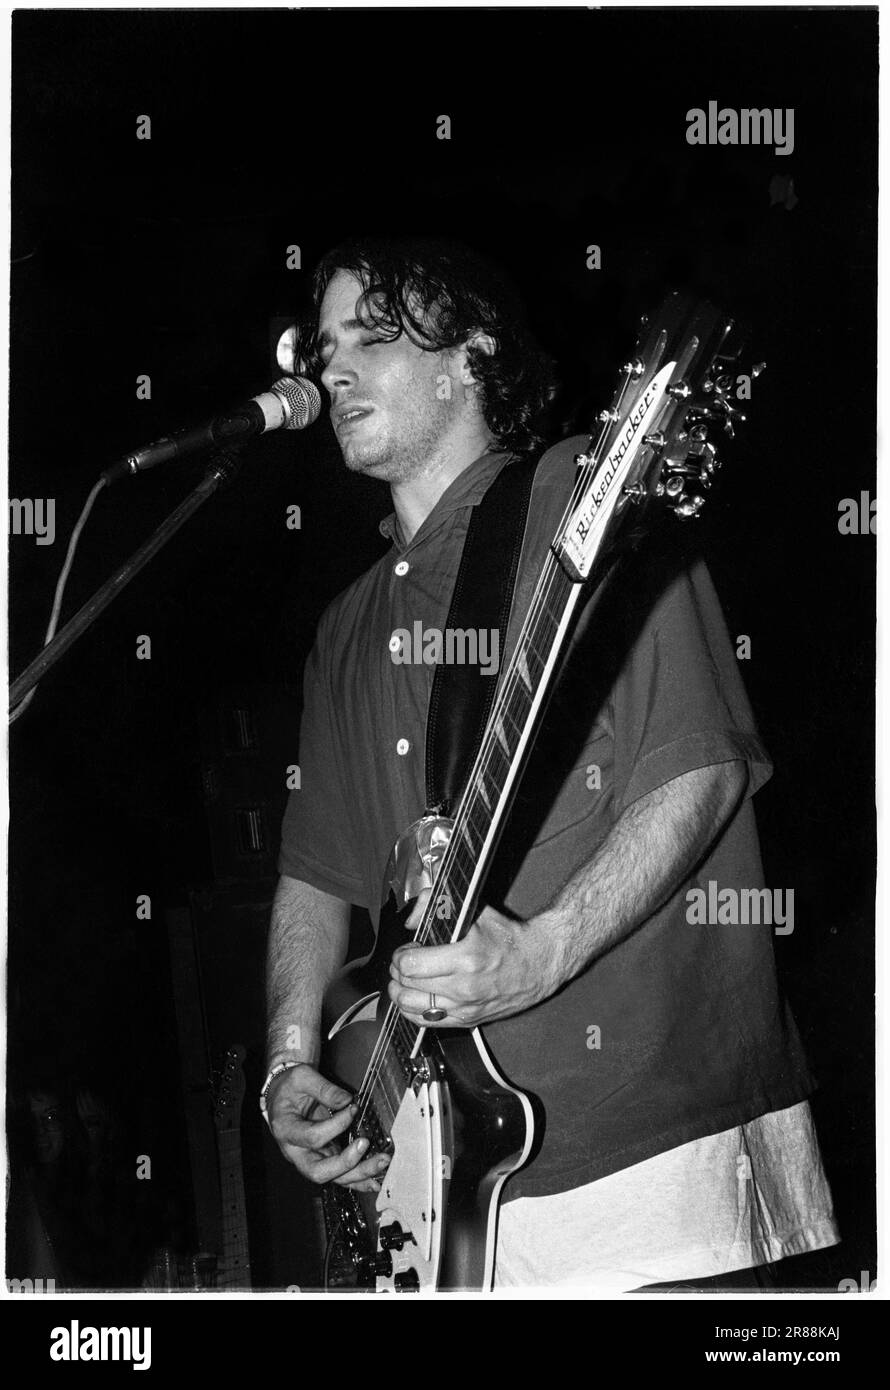 JEFF BUCKLEY, RARE UK TOUR PICTURES, 1995: Jeff Buckley (1966-1991) playing live at the Fleece and Firkin in Bristol, England on 15 January 1995 during his Mystery White Boy European Tour. Previously unpublished pictures from negatives rediscovered in 2016. Photograph: ROB WATKINS.   INFO: Jeff Buckley, an American singer-songwriter of the '90s, possessed an ethereal voice and profound songwriting talent. His haunting rendition of 'Hallelujah' and debut album 'Grace' solidified his status as a legendary figure in alternative rock, despite his tragically short career. Stock Photo